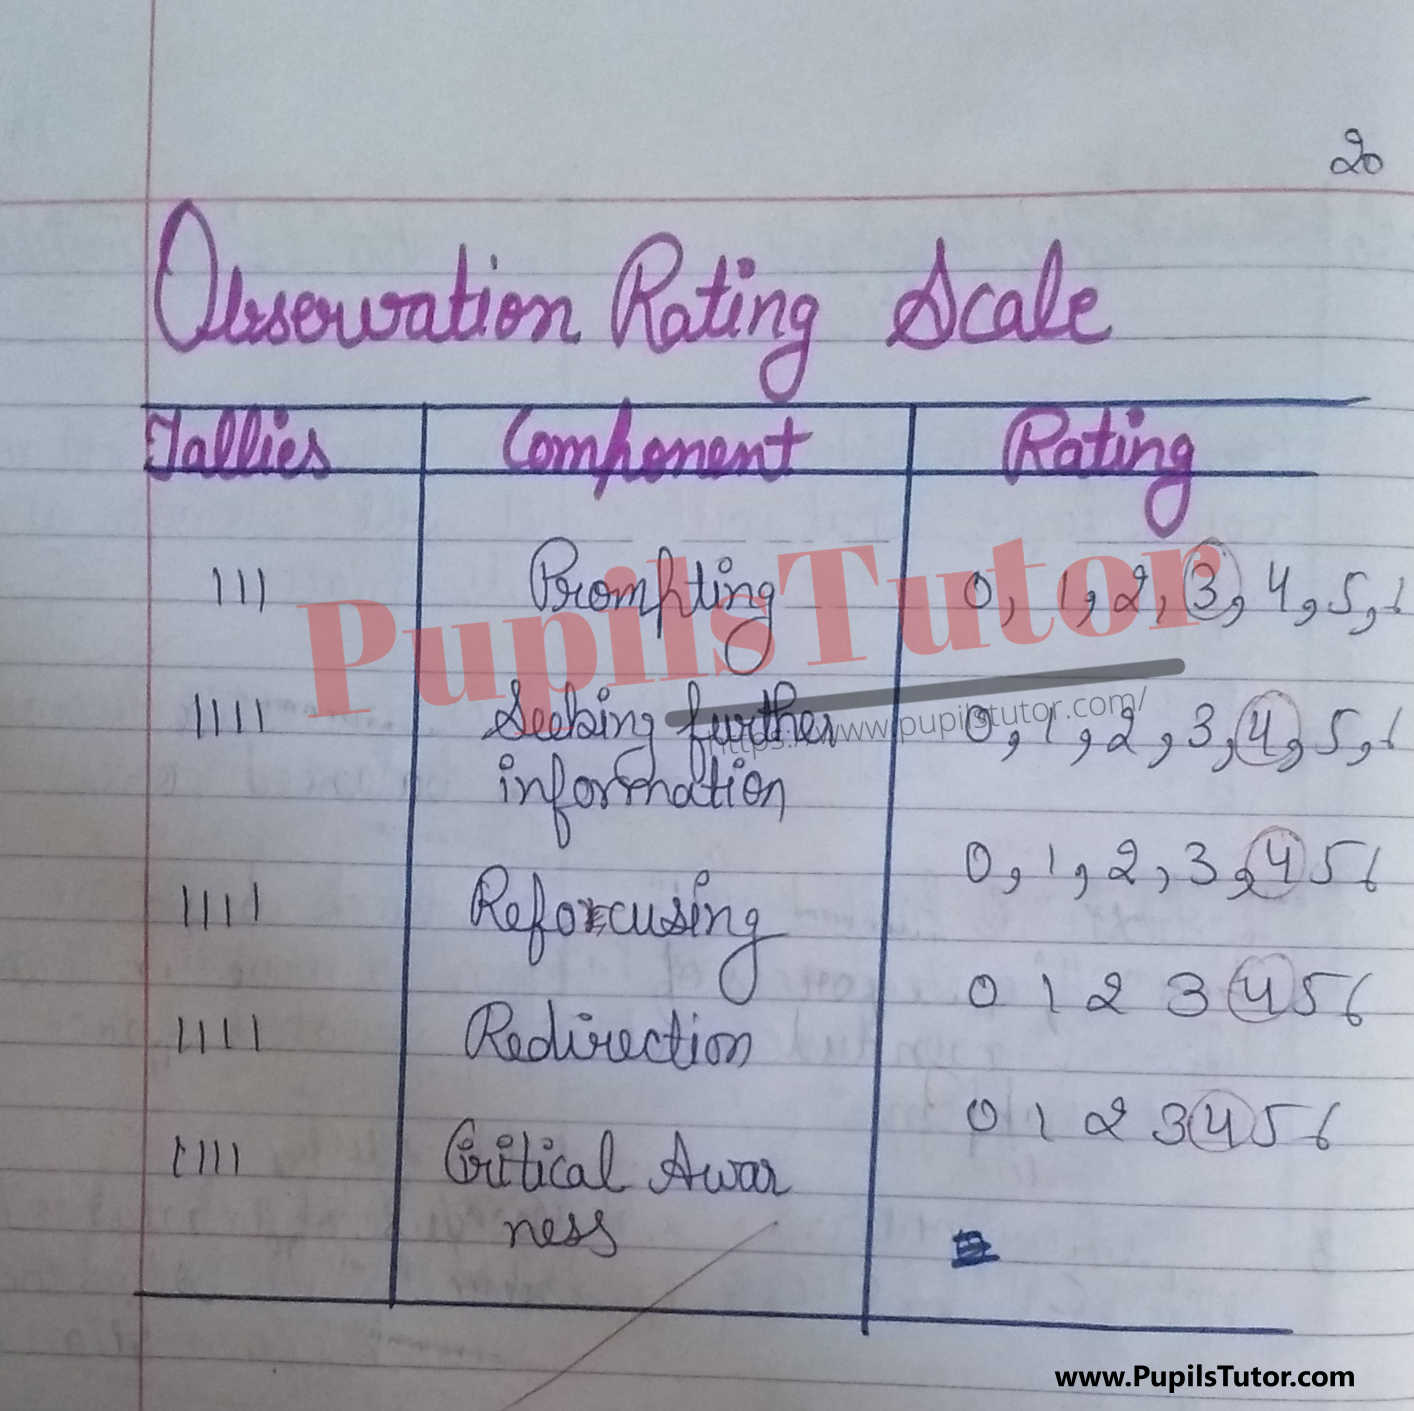 BED, DELED, BTC, BSTC, M.ED, DED And NIOS Teaching Of Physical Science Innovative Digital Lesson Plan Format On Force Topic For Class 4th 5th 6th 7th 8th 9th, 10th, 11th, 12th  – [Page And Photo 4] – pupilstutor.com